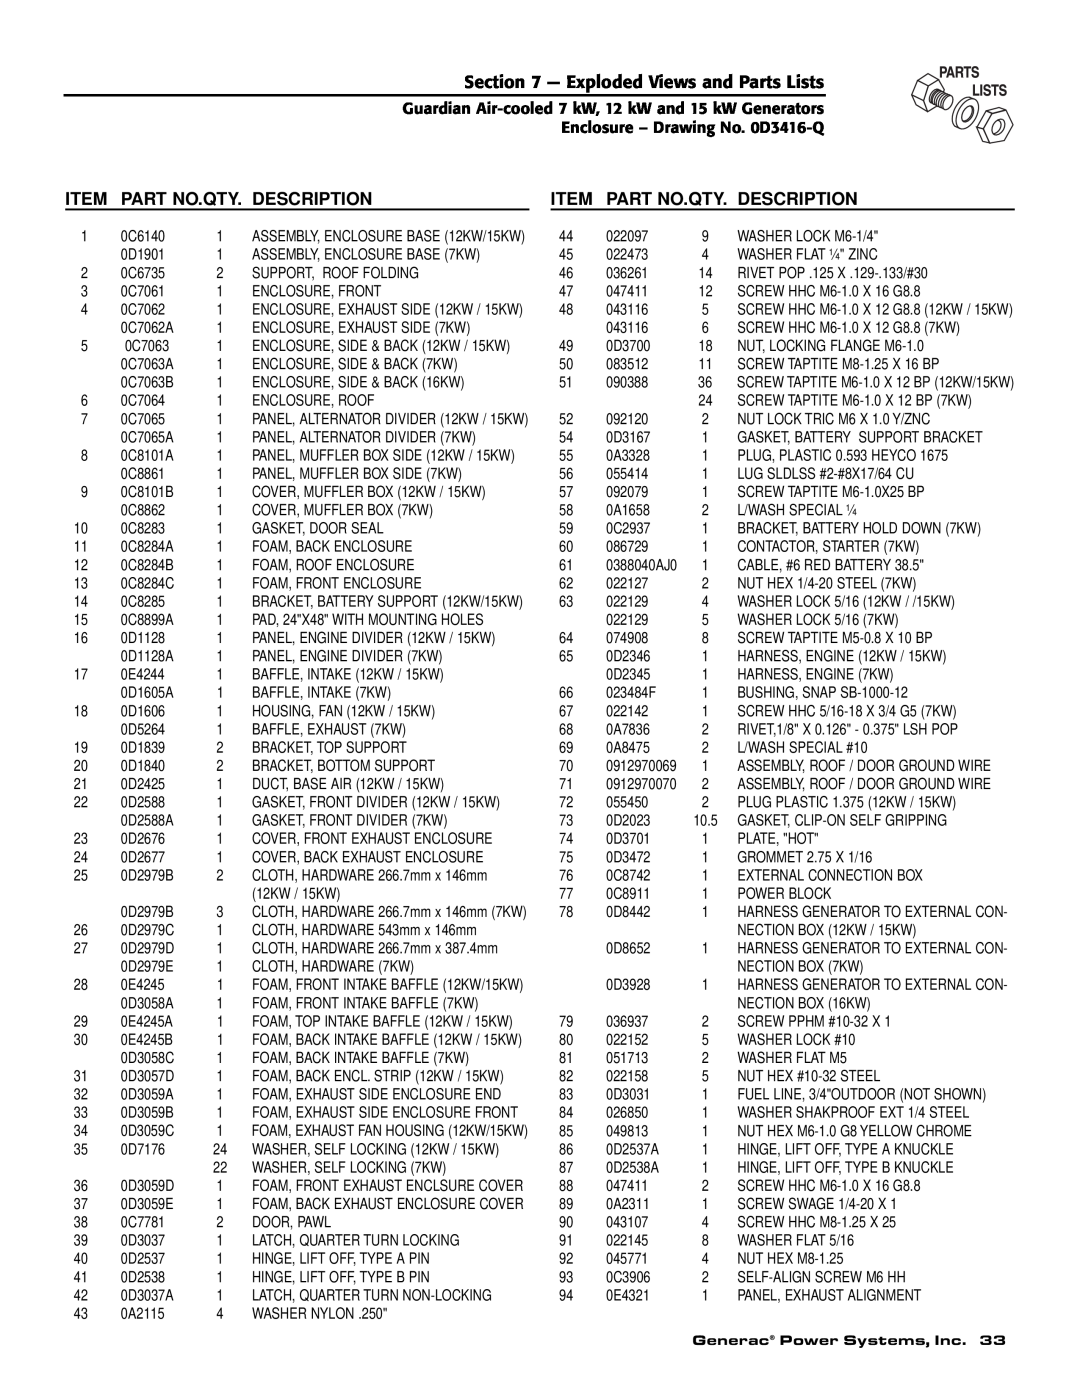 Generac Power Systems 04389-1, 04390-1, 04456-1 owner manual Exploded Views and Parts Lists, Item, Part No.Qty. Description 